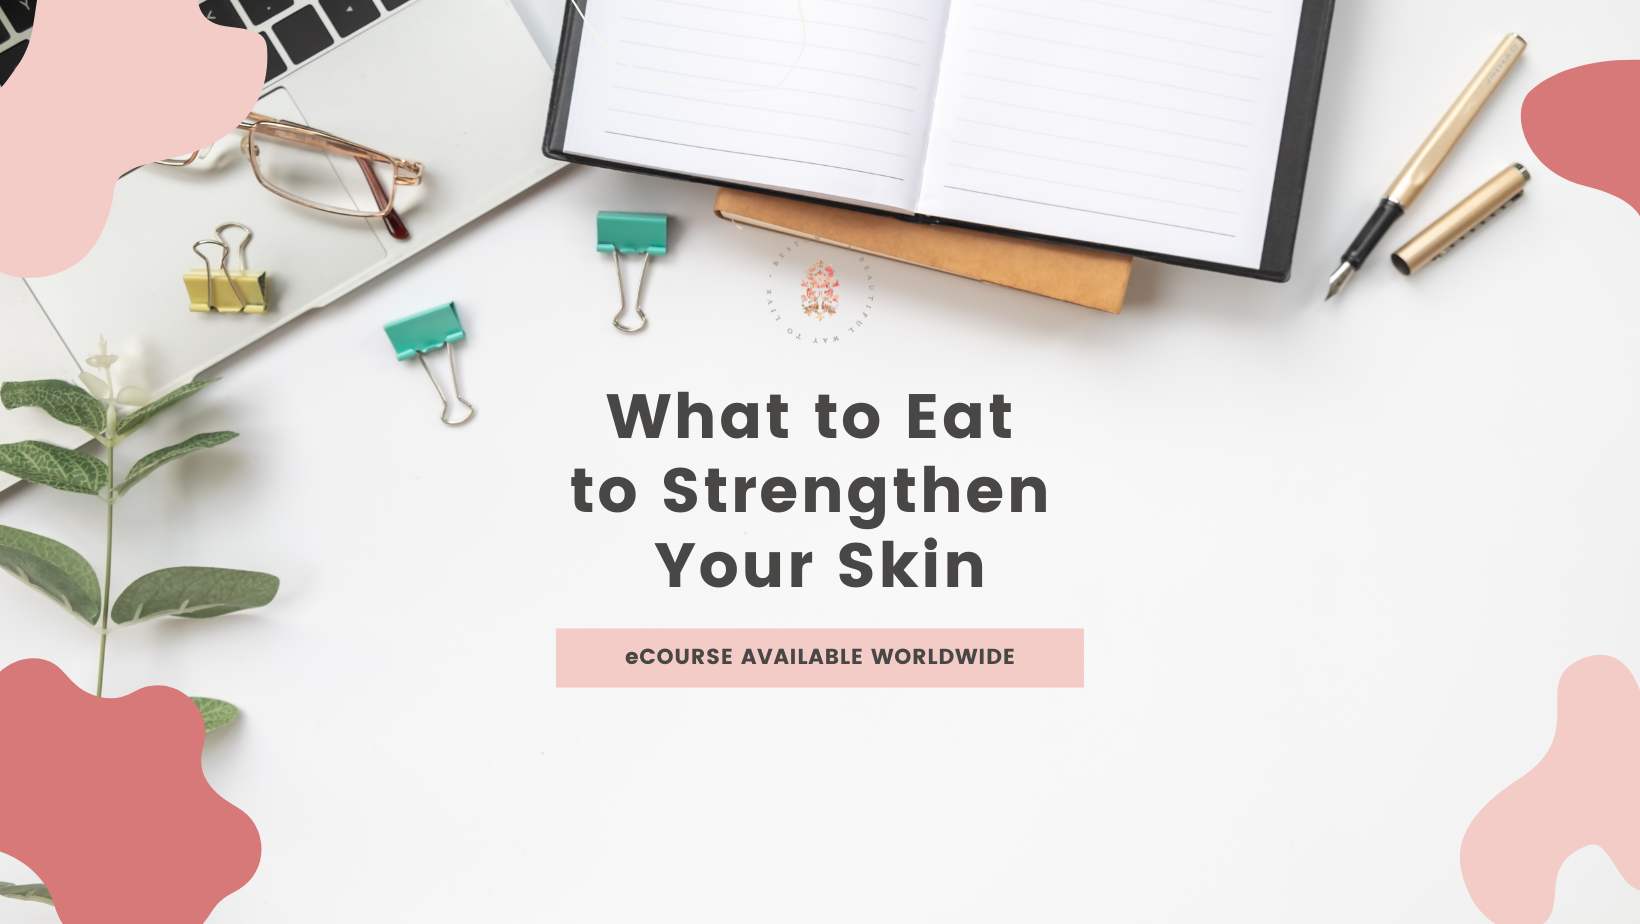 What to Eat to Strengthen Your Skin